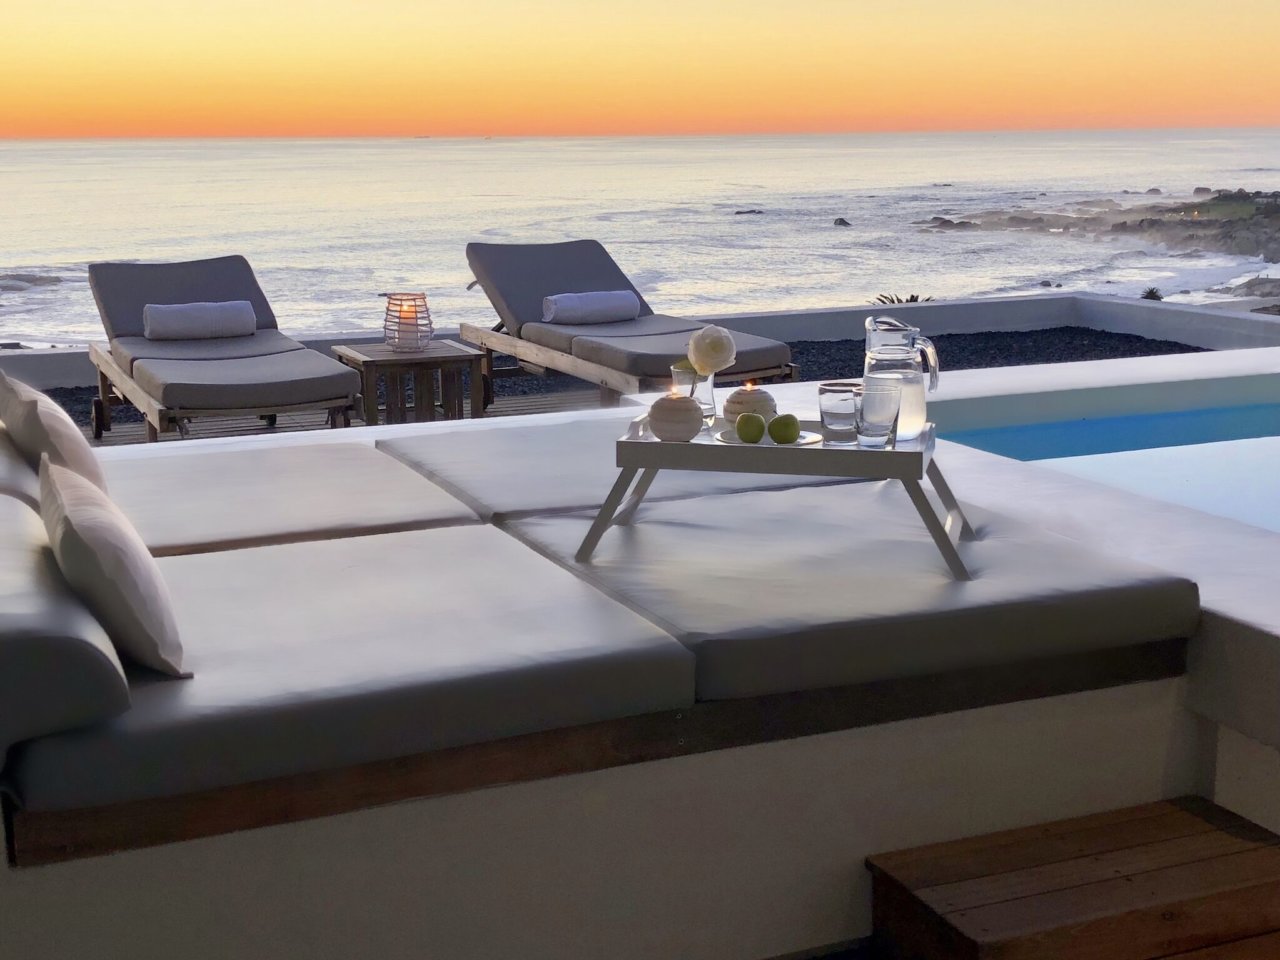 Photo 24 of Aqua Villa accommodation in Camps Bay, Cape Town with 5 bedrooms and 5 bathrooms